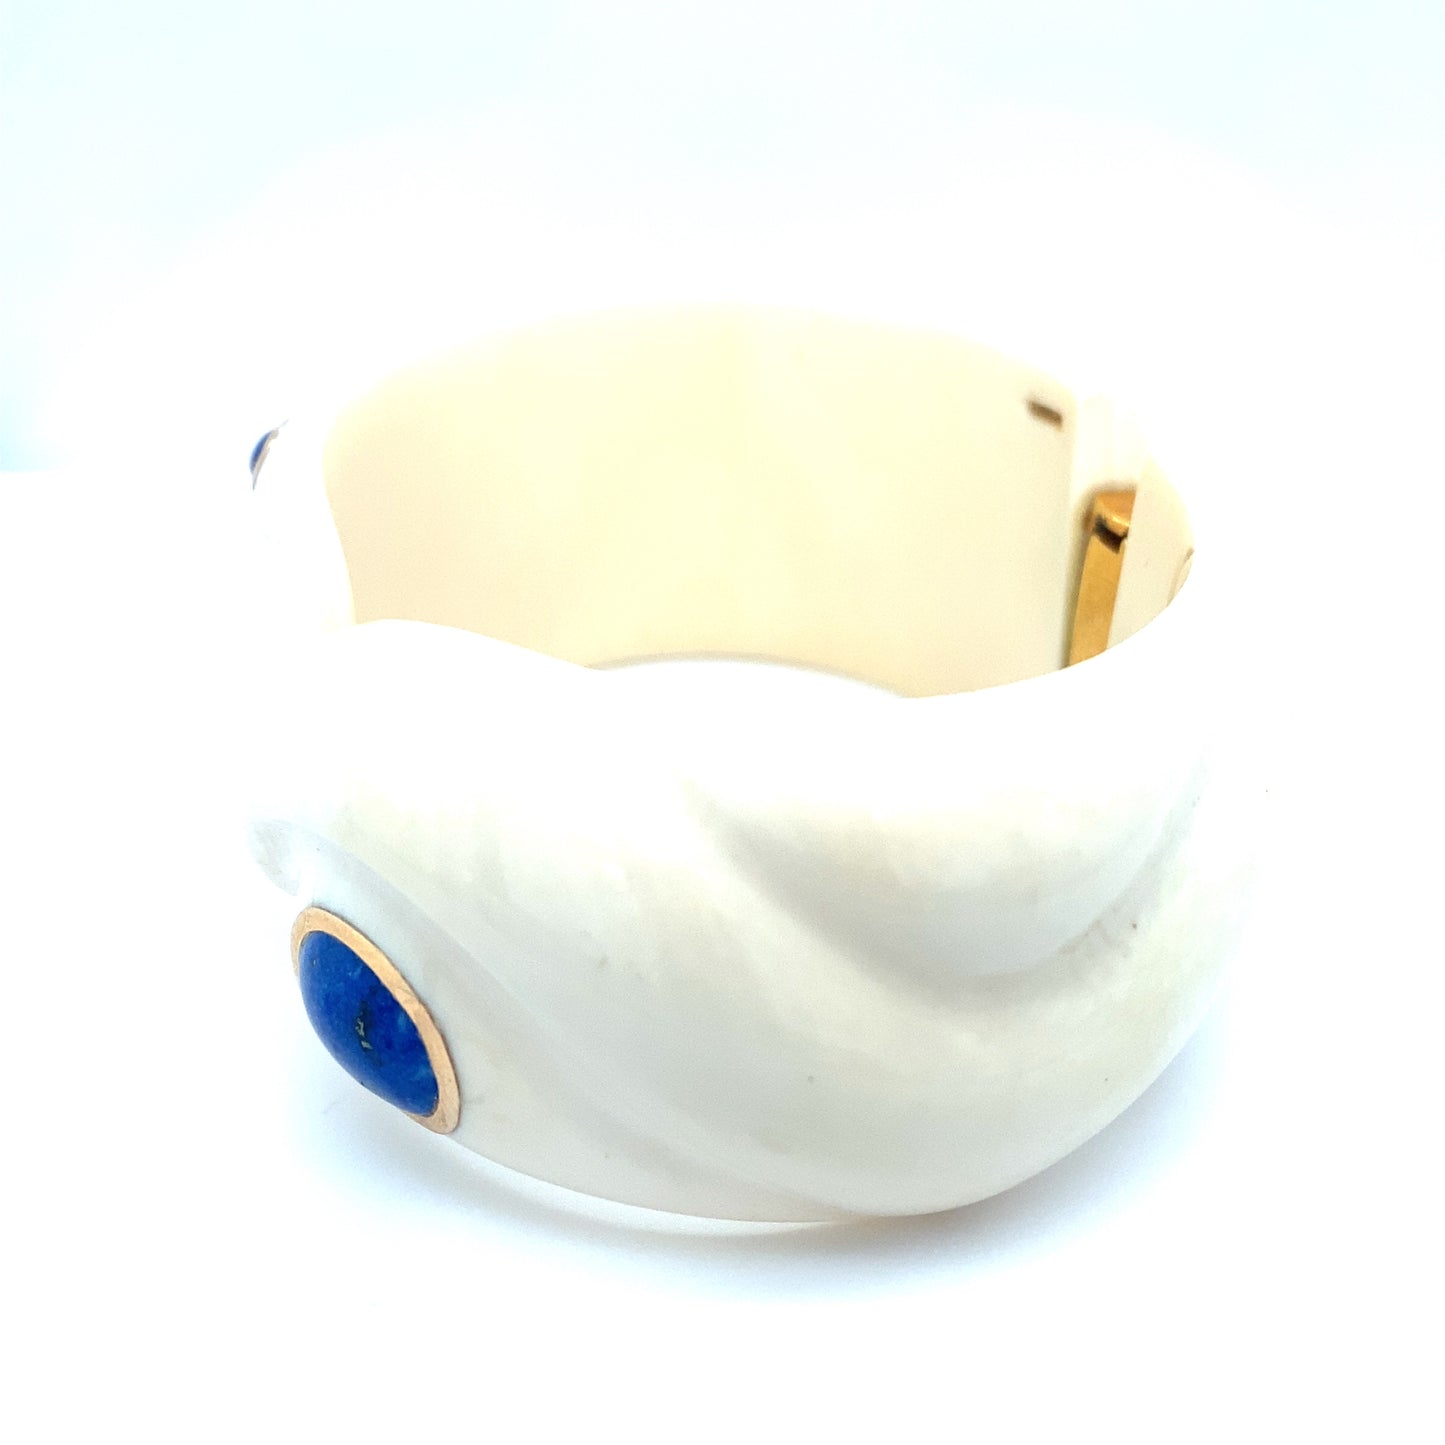 Circa 1960s Resin and Lapis Lazuli Hinged Bangle with 14K Gold Accents